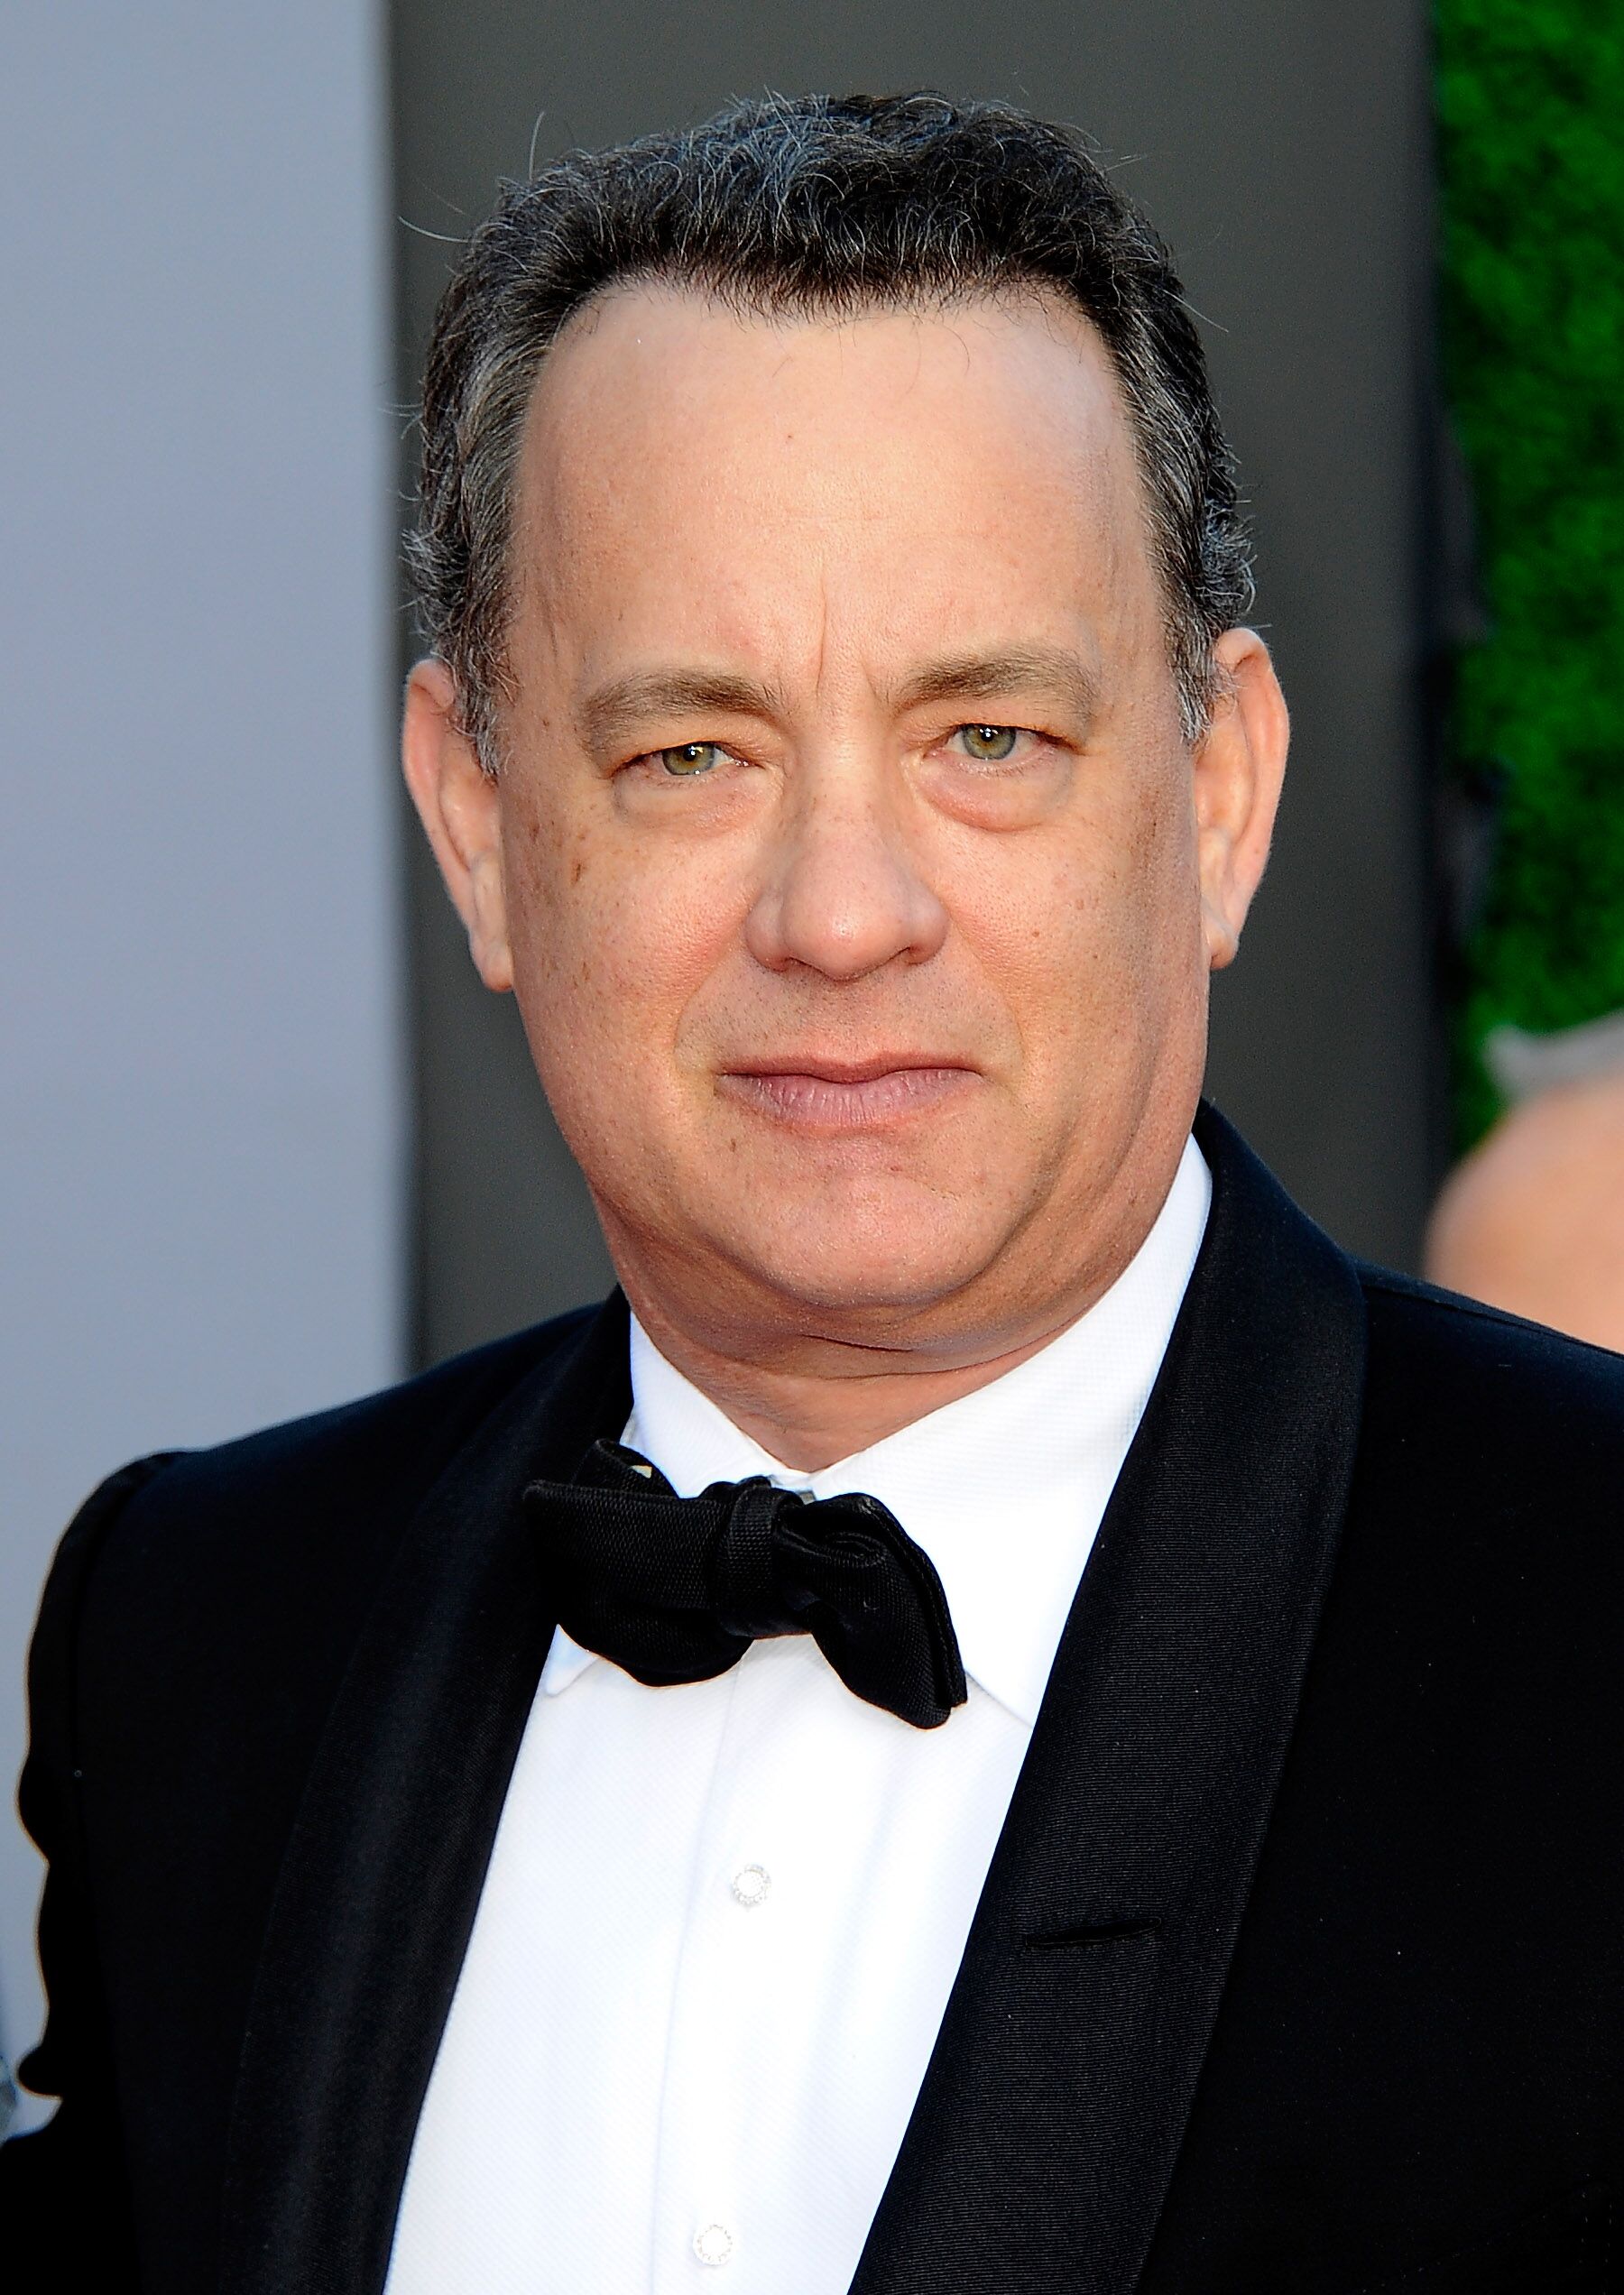 Tom Hanks during at the BAFTA Brits in 2011. | Source: Getty Images